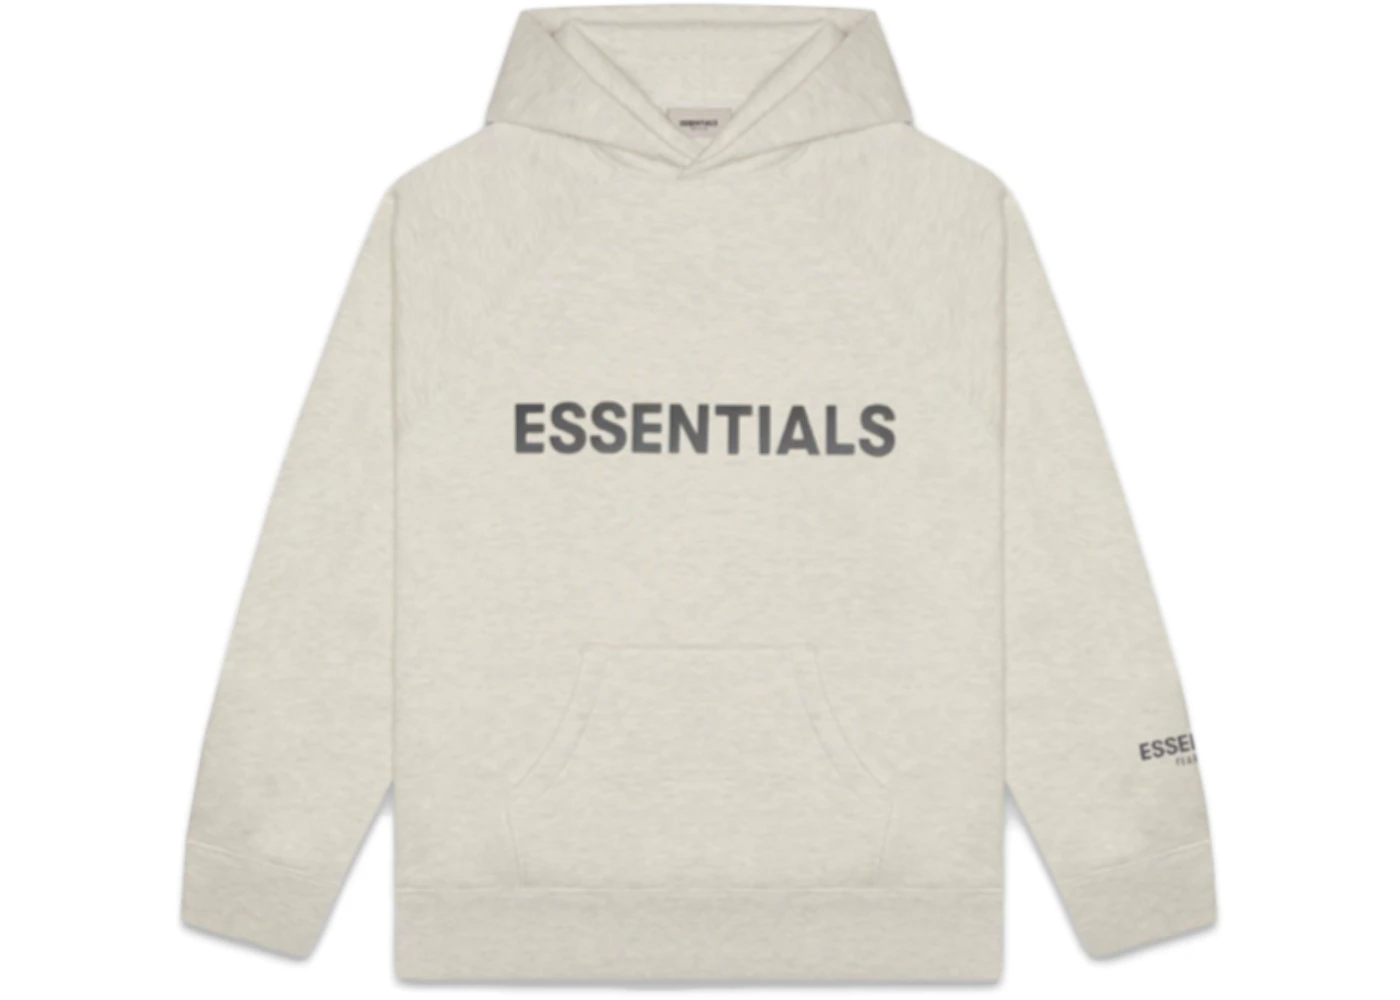 FEAR OF GOD ESSENTIALS 3D Silicon Applique Pullover Hoodie Oatmeal Heather